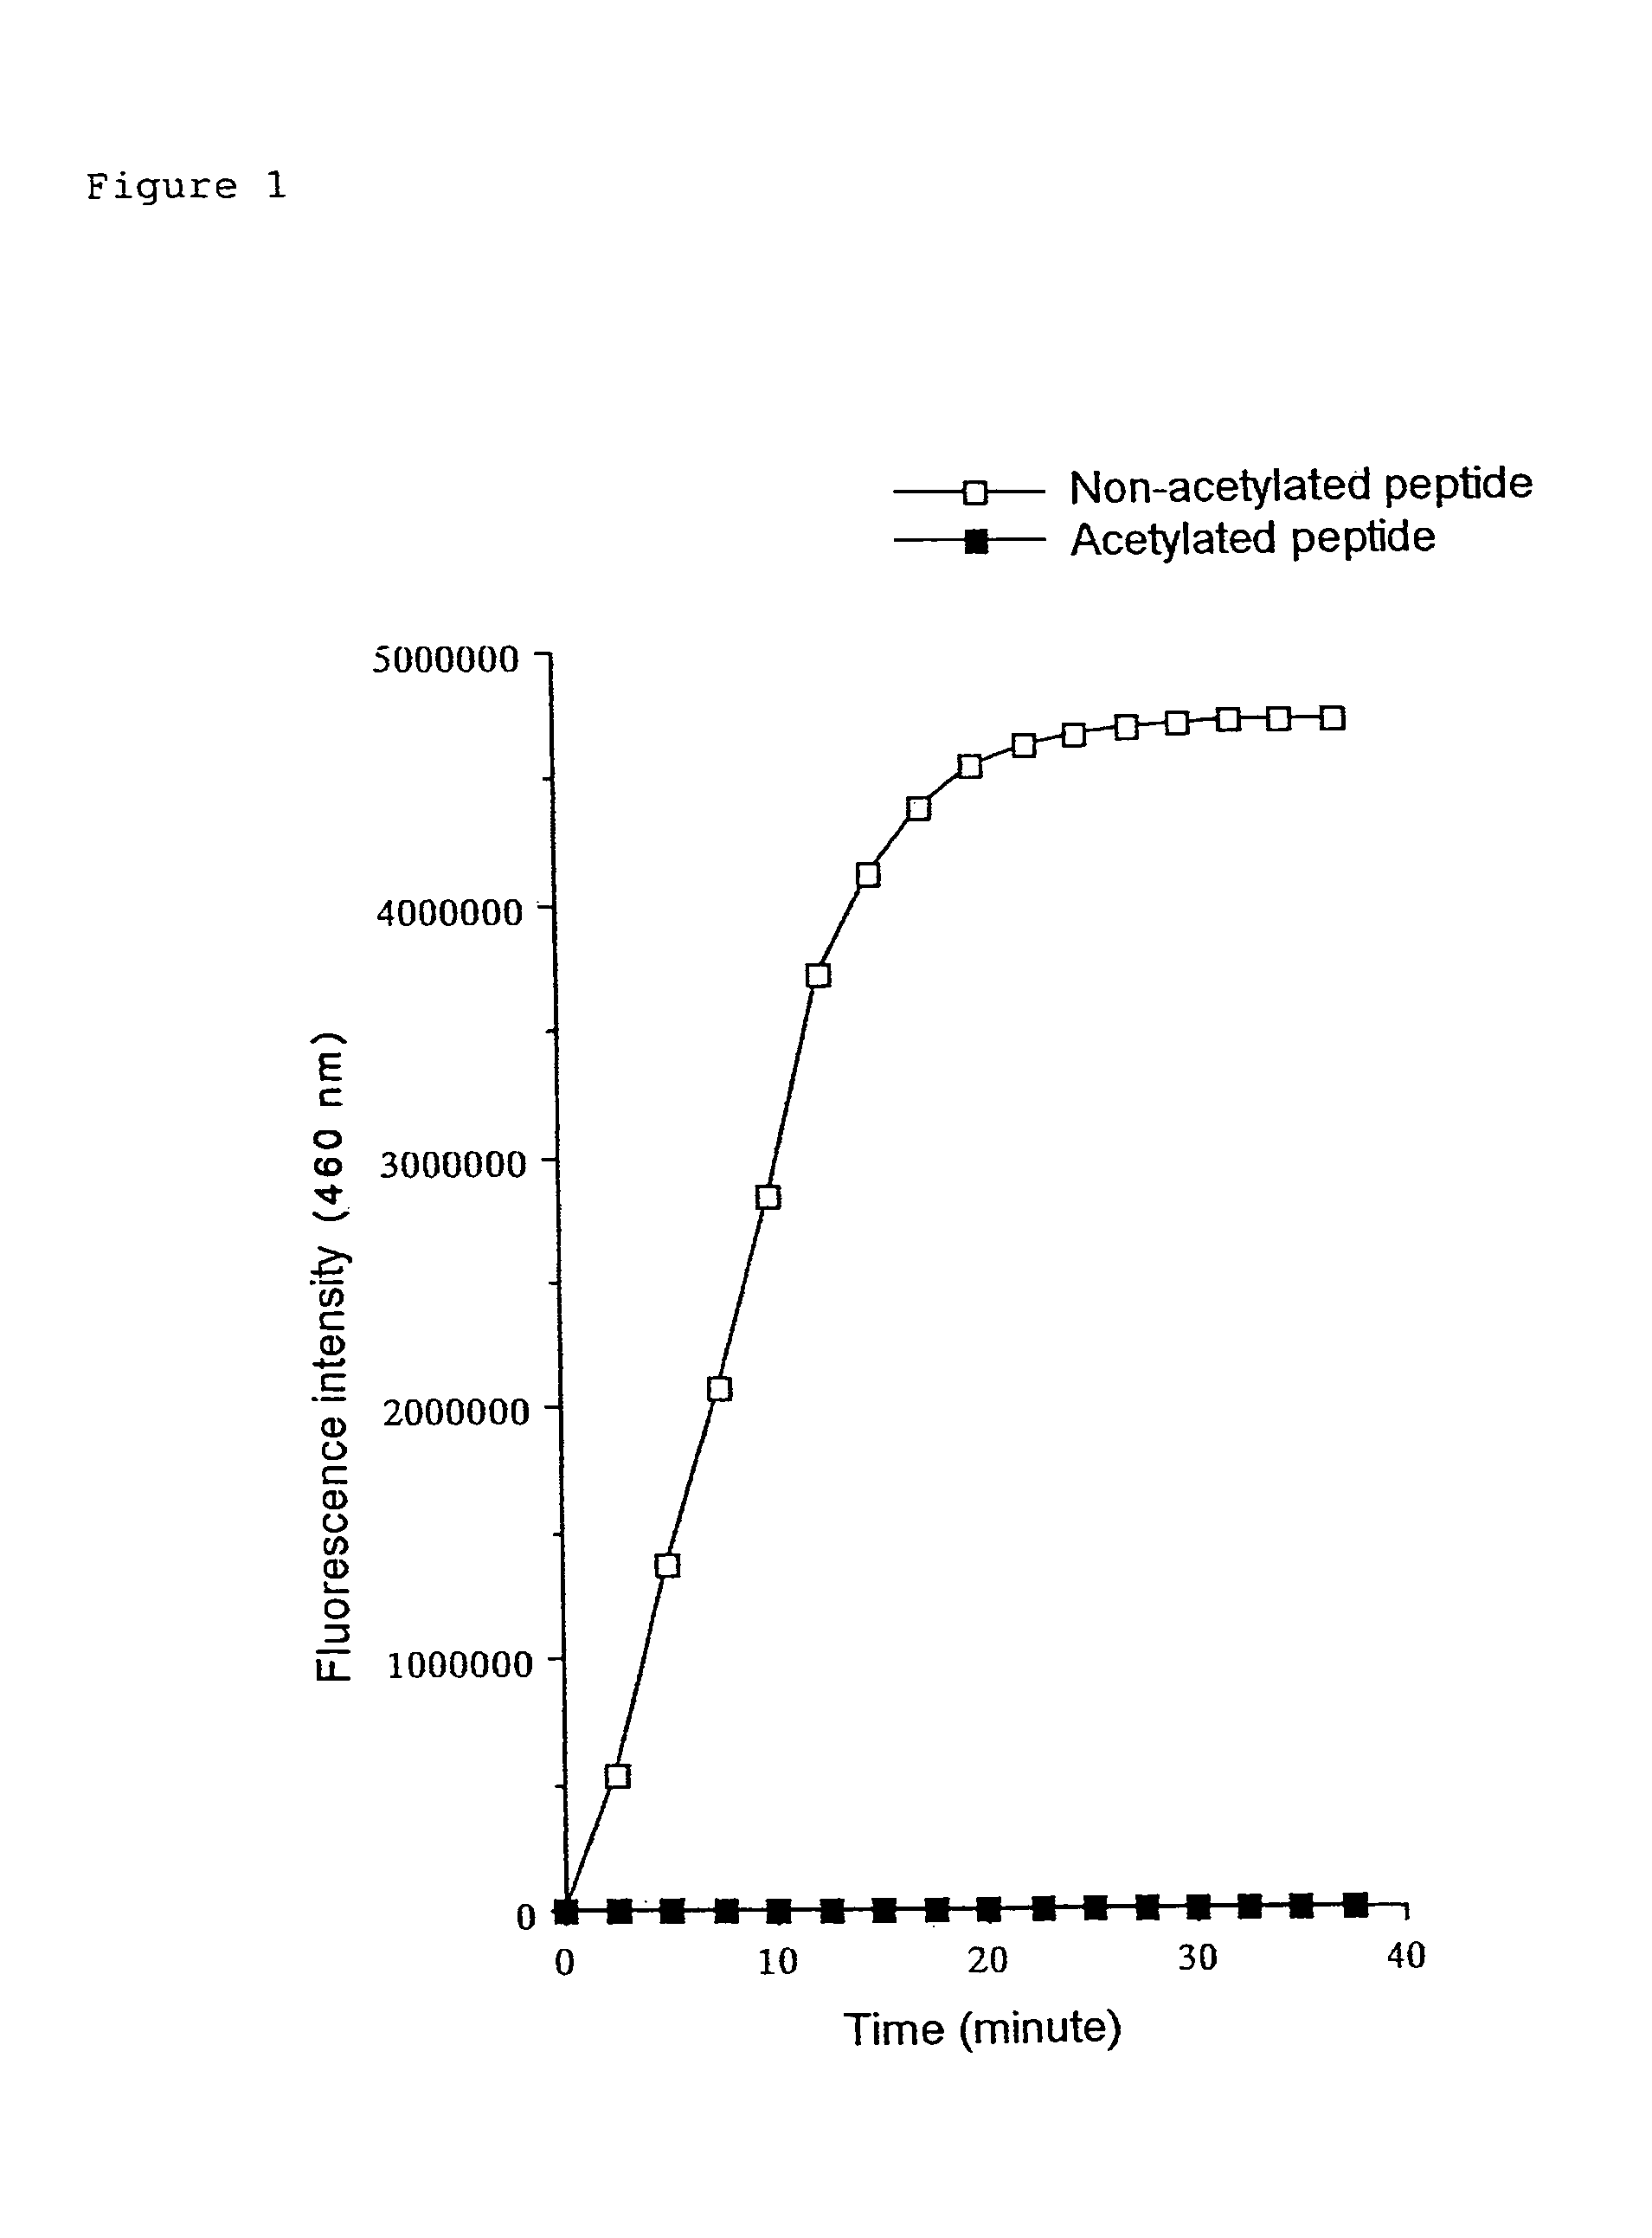 Kit for determining the acetylation level of a peptide based on sensitivity of the peptide to peptidase